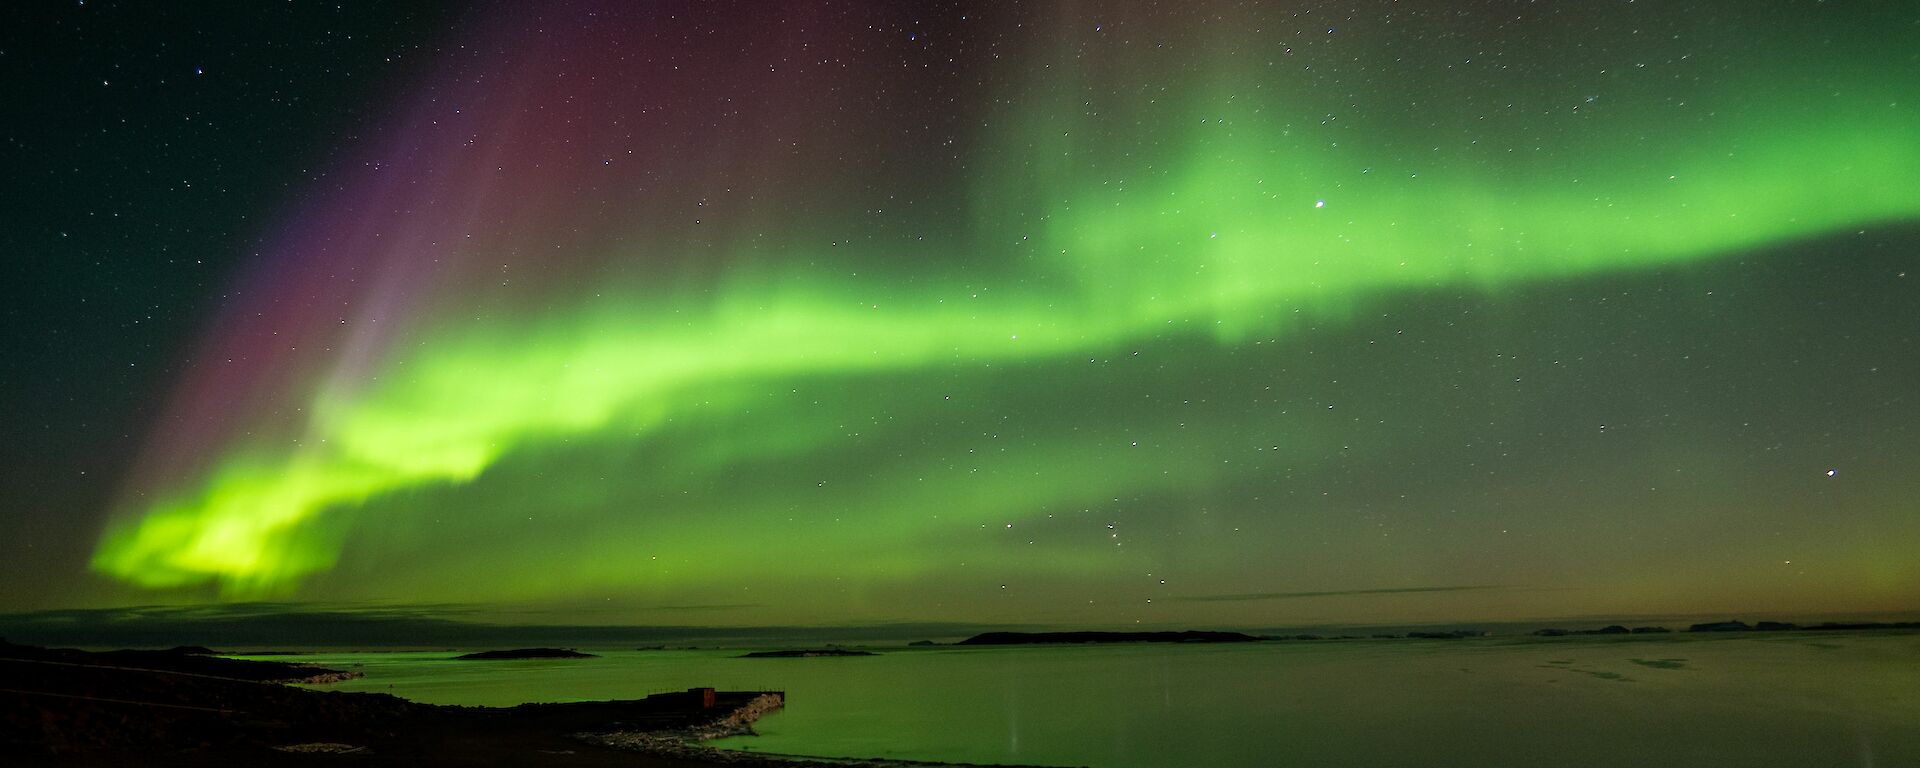 A sunning green aurora australis over the shore and bay.